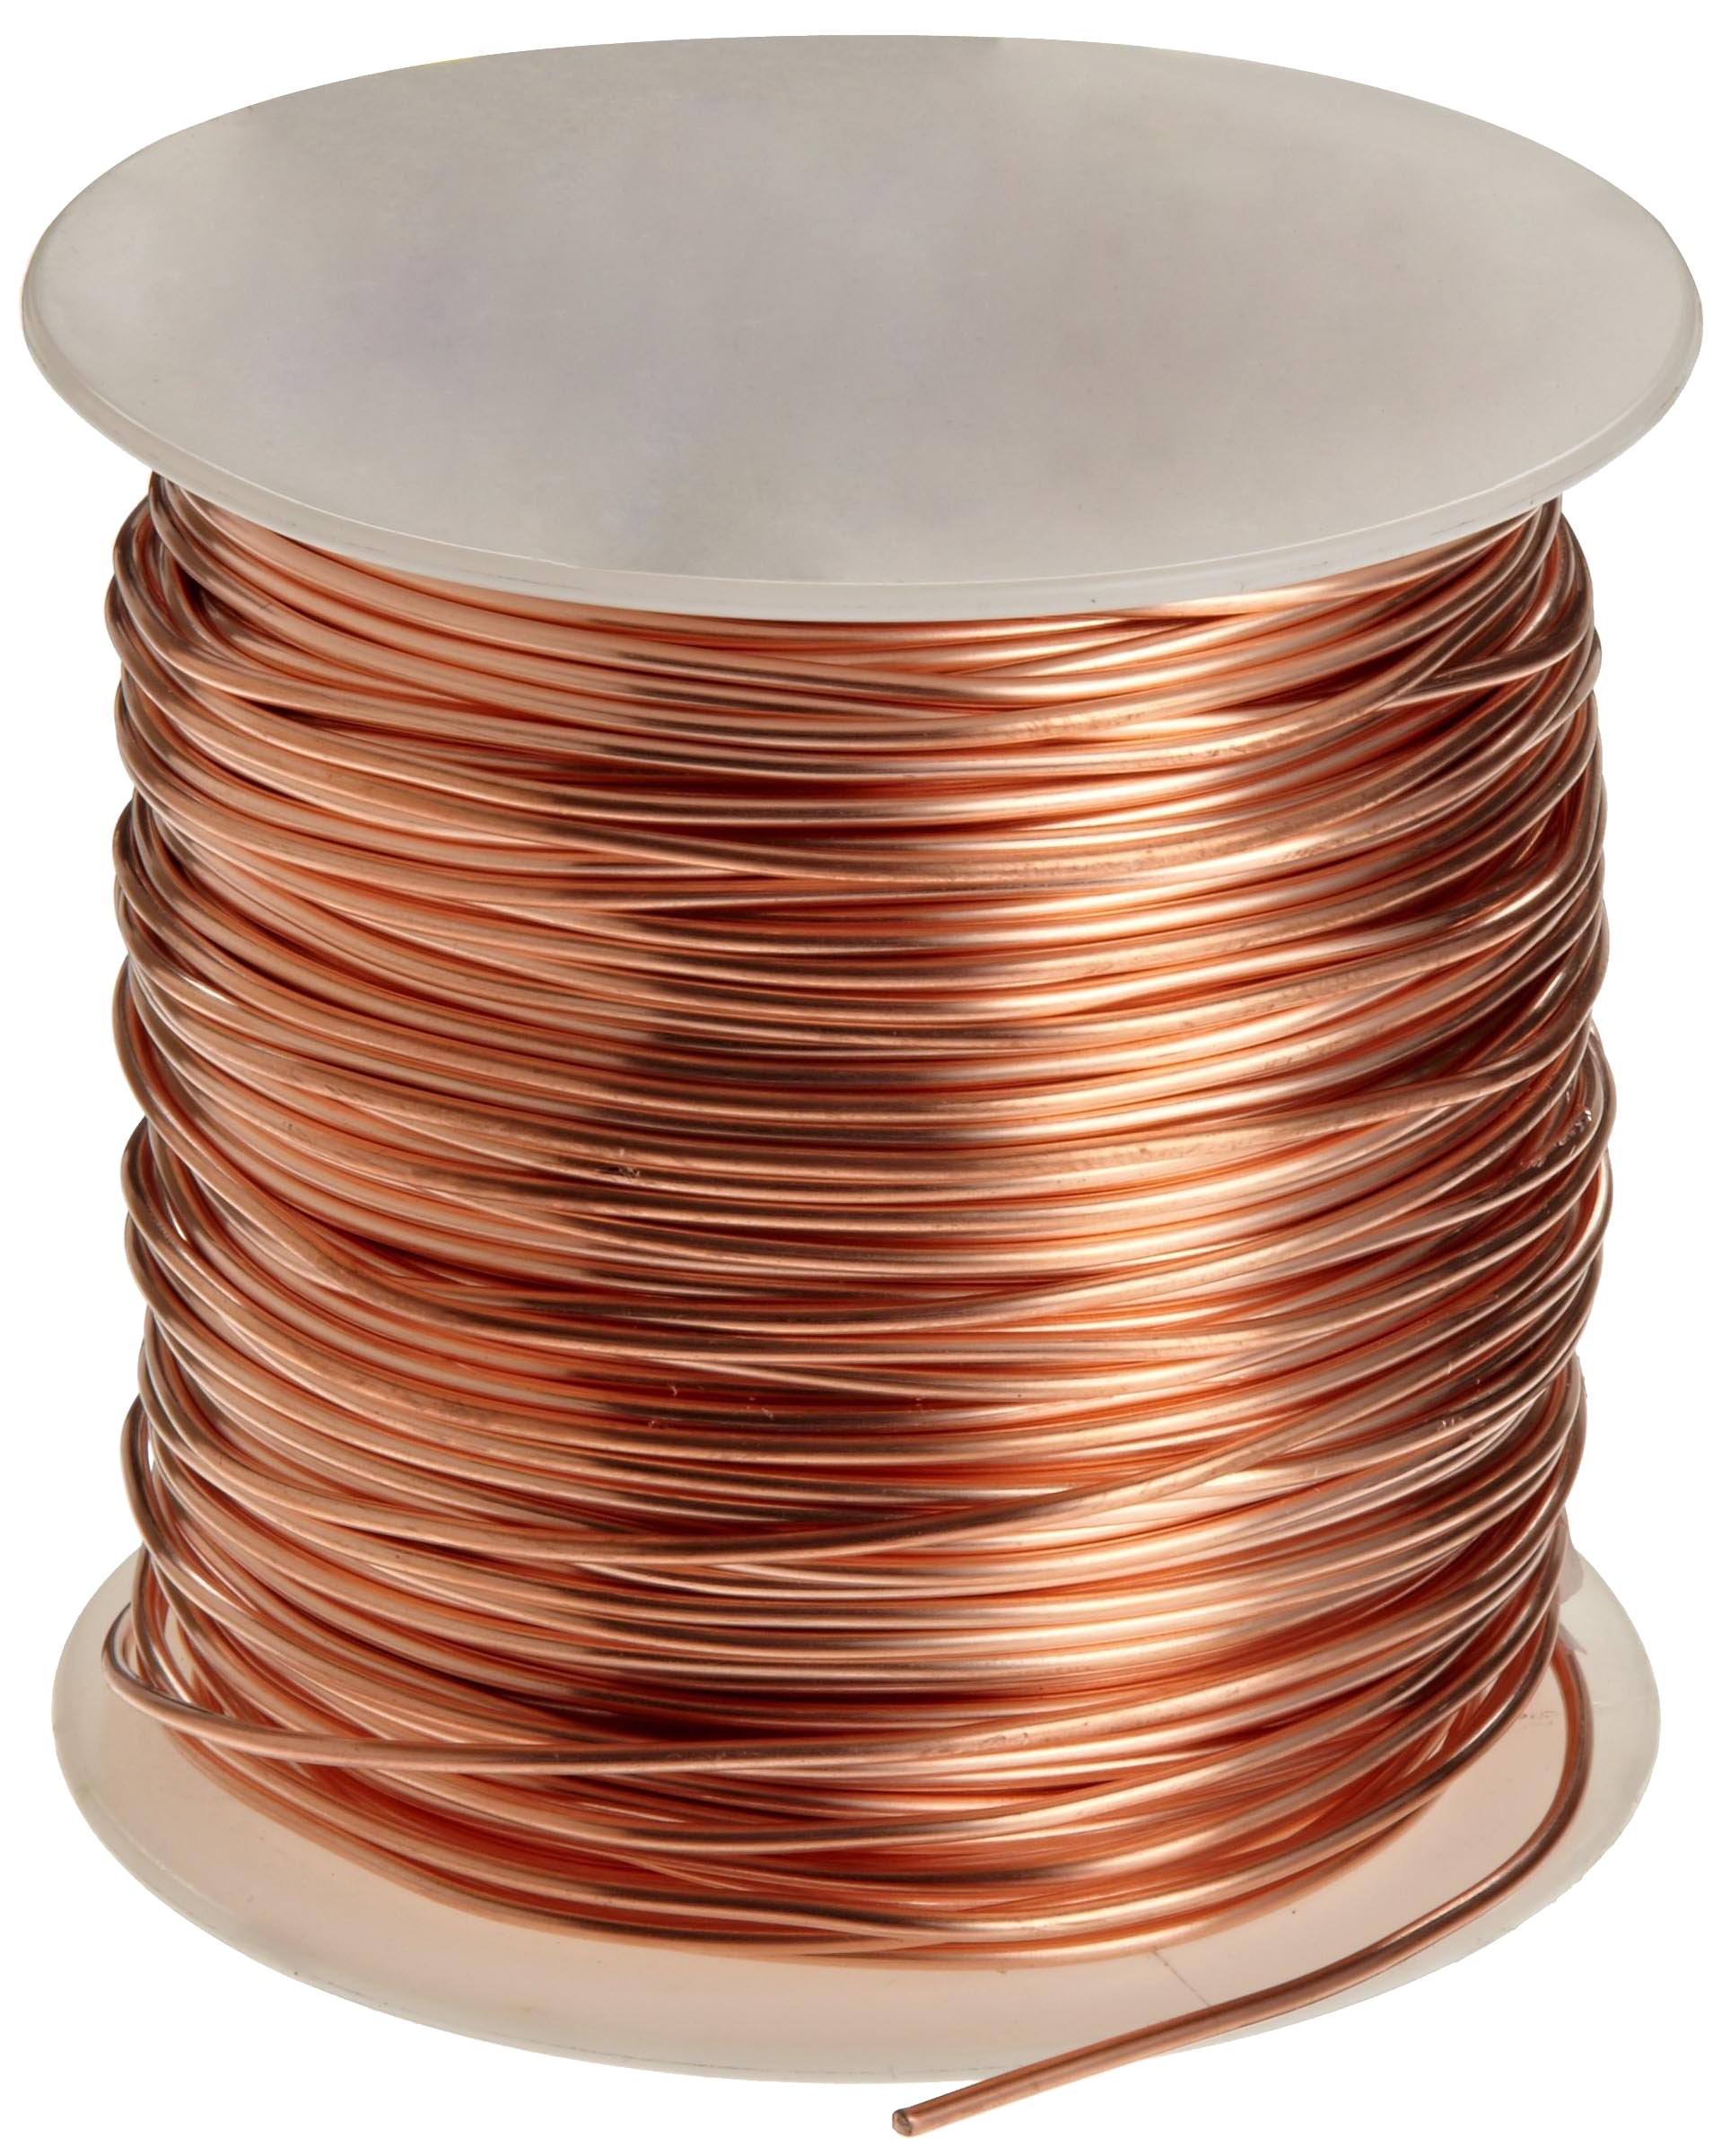 Copper Wire Free Photo PNG PNG Image